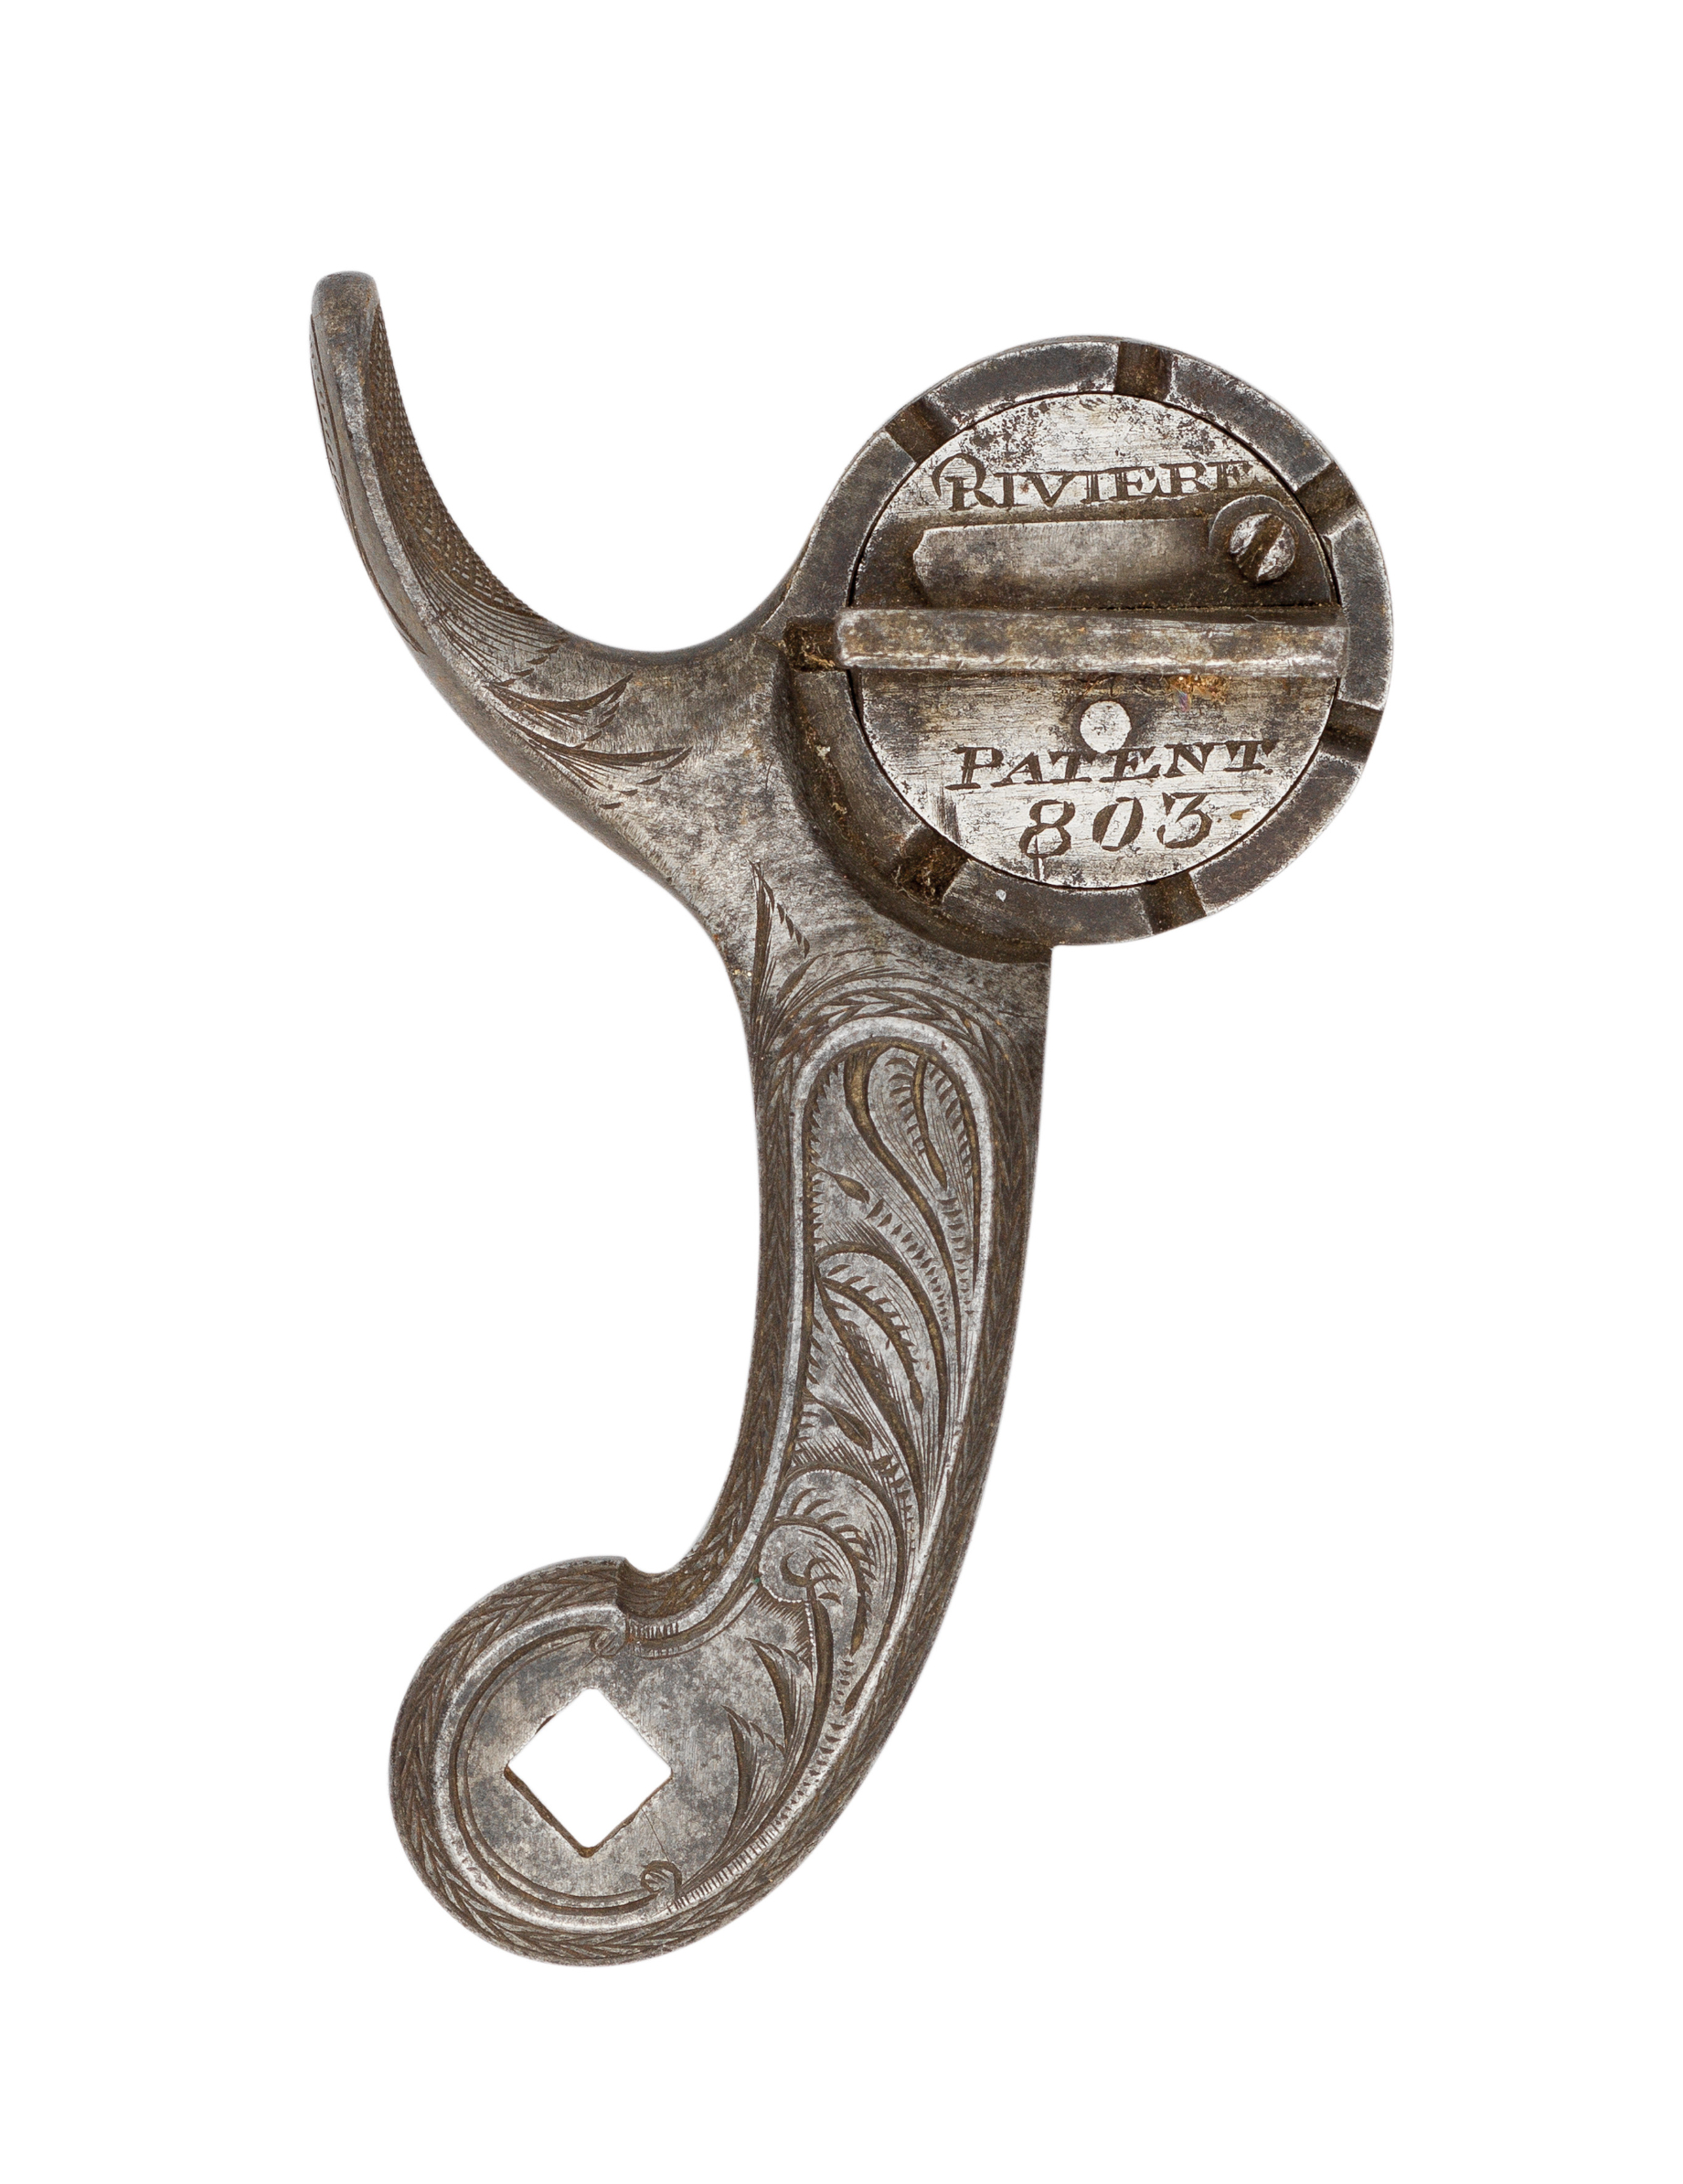 Ⓦ A RARE DETACHED MULTI-SHOT HAMMER FROM A RIVIERE PATENT LOCK^ NO. 803^ CIRCA 1825; THREE MAINSP